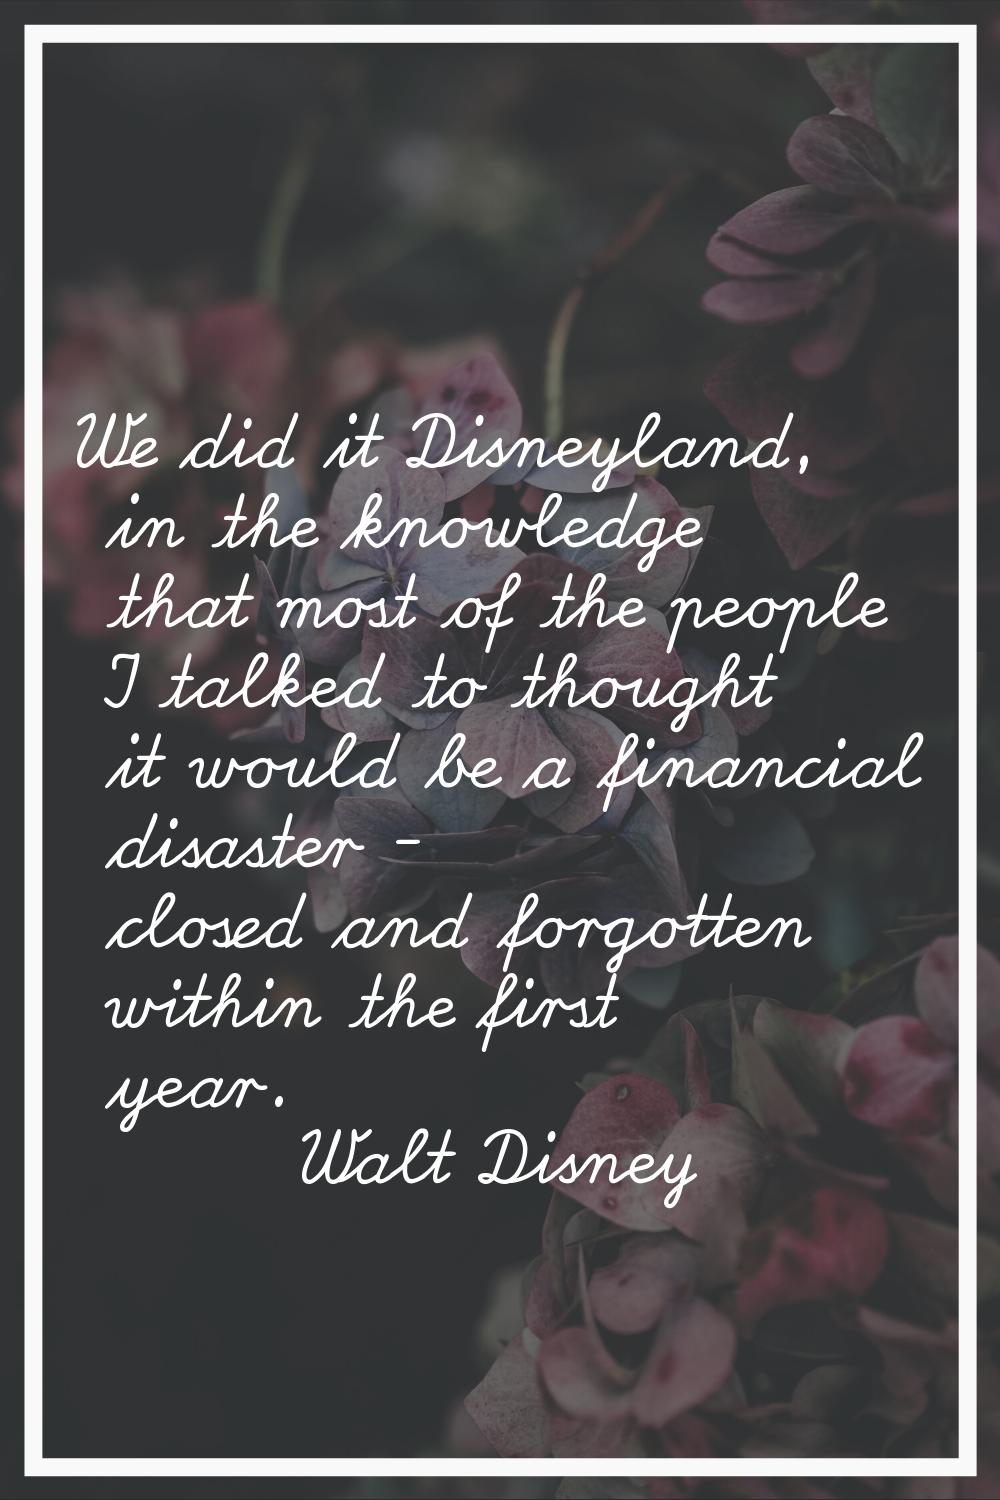 We did it Disneyland, in the knowledge that most of the people I talked to thought it would be a fi